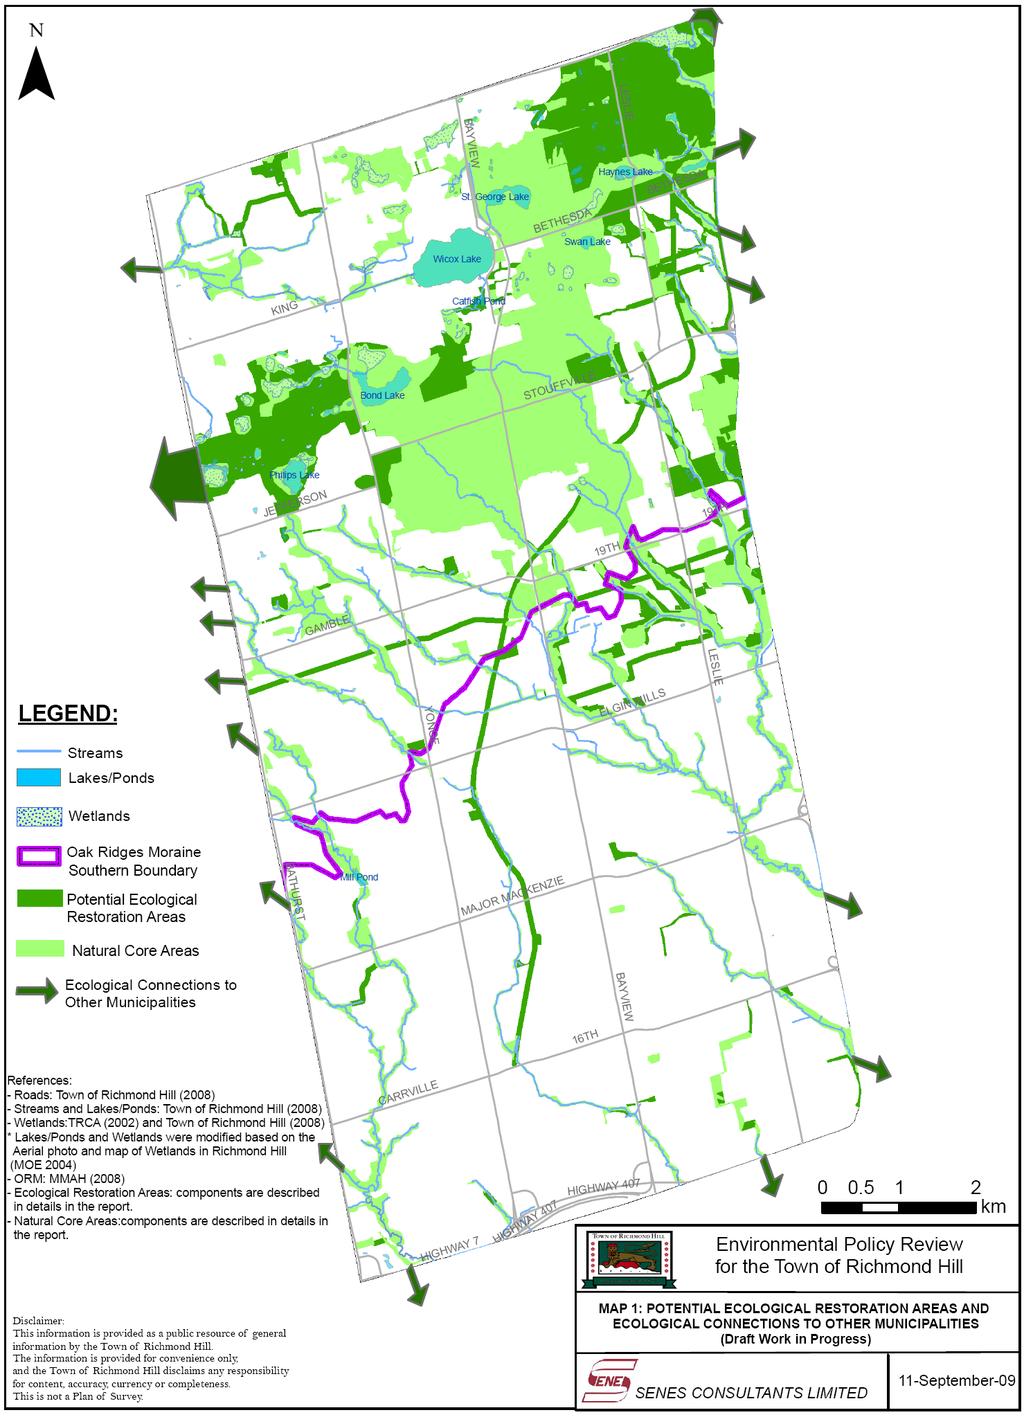 MAP 1 POTENTIAL ECOLOGICAL RESTORATION AREAS AND ECOLOGICAL CONNECTIONS